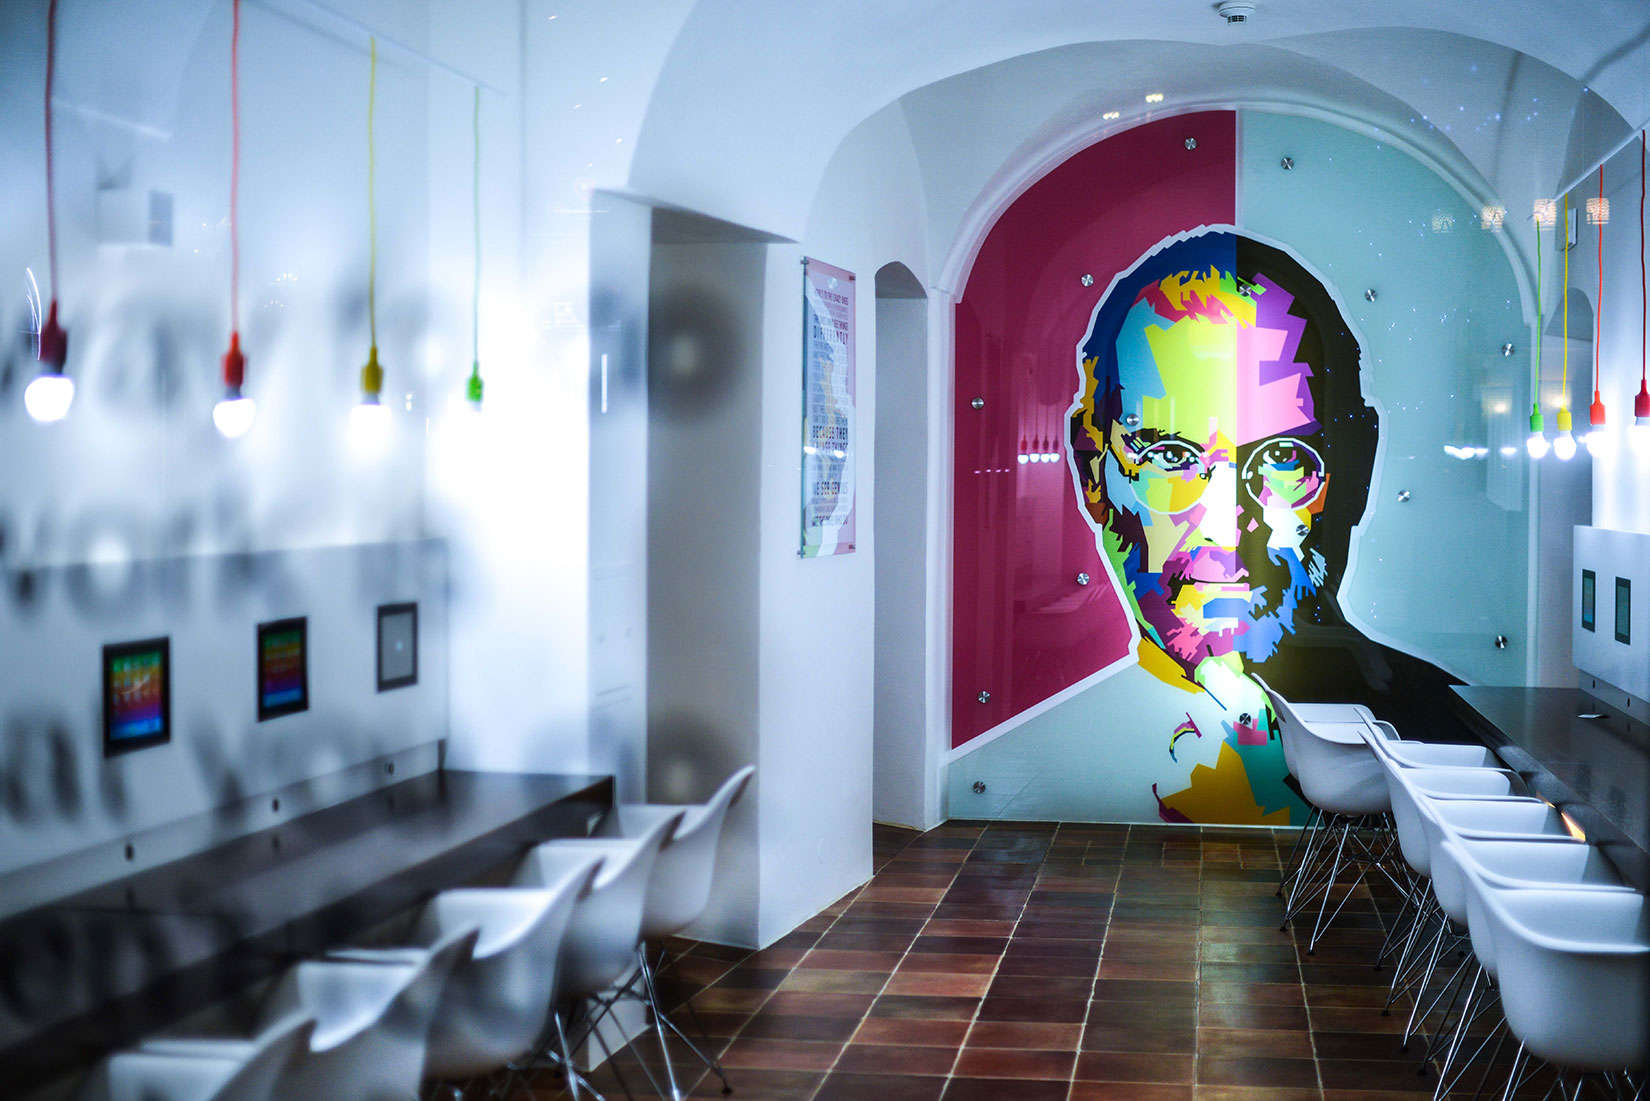 The Apple Museum in Prague pays homage to innovation and Apple founder Steve Jobs.